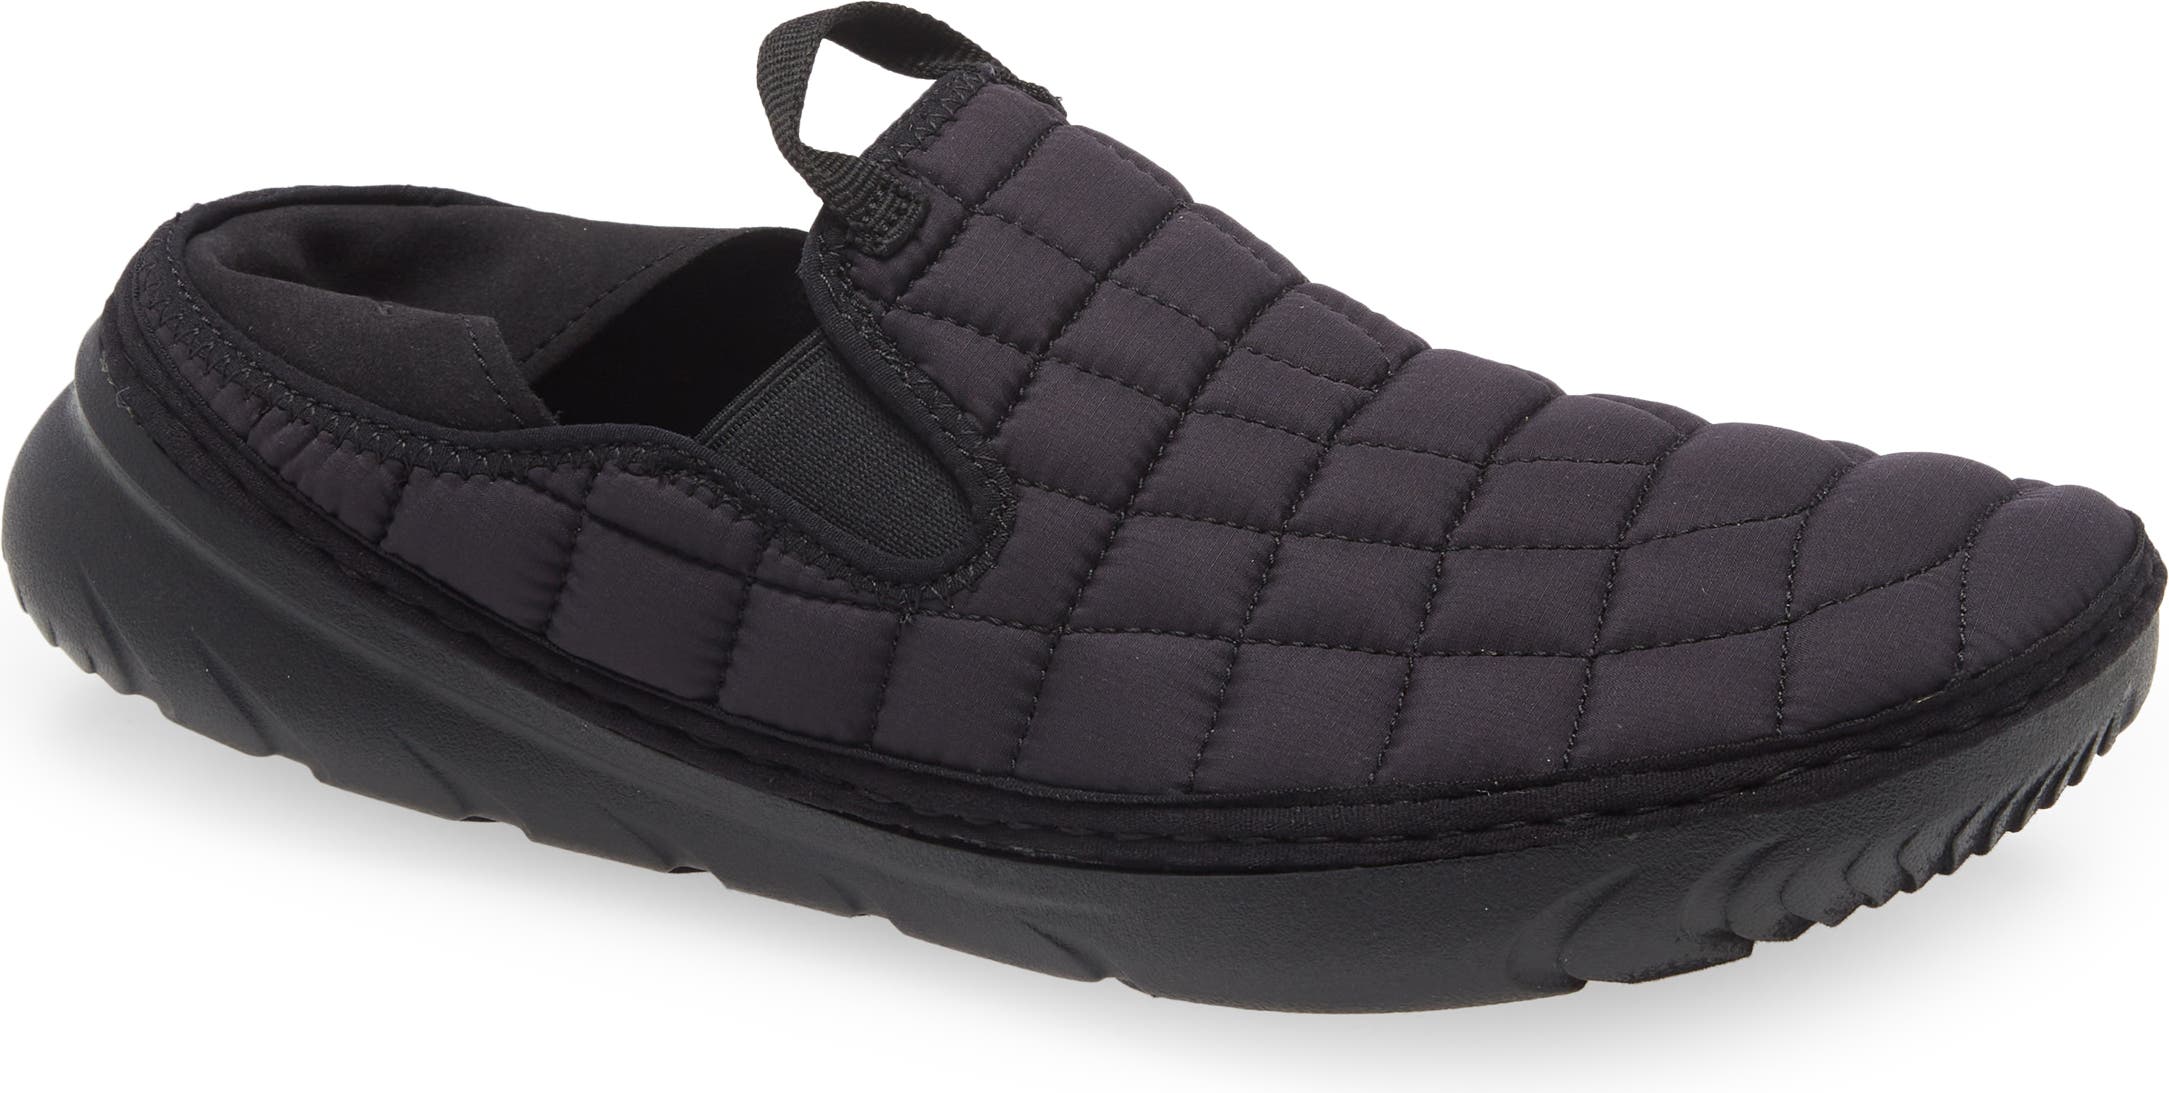 Merrell Quilted Slip Ons Hut Moc Triple Black 